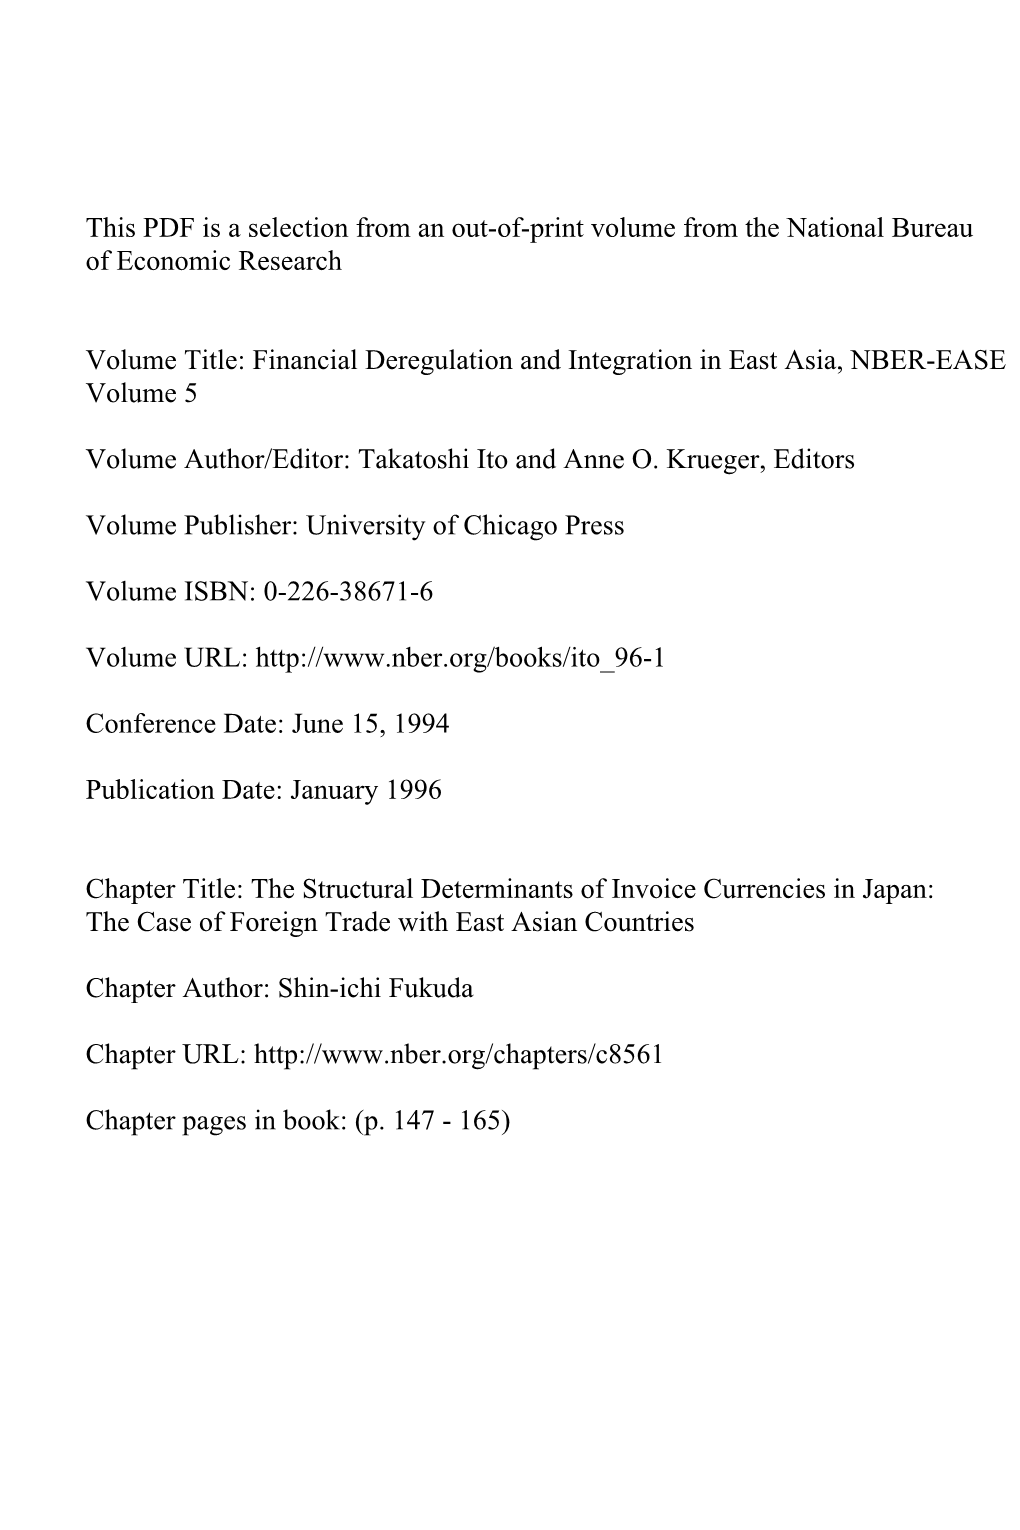 The Structural Determinants of Invoice Currencies in Japan: the Case of Foreign Trade with East Asian Countries